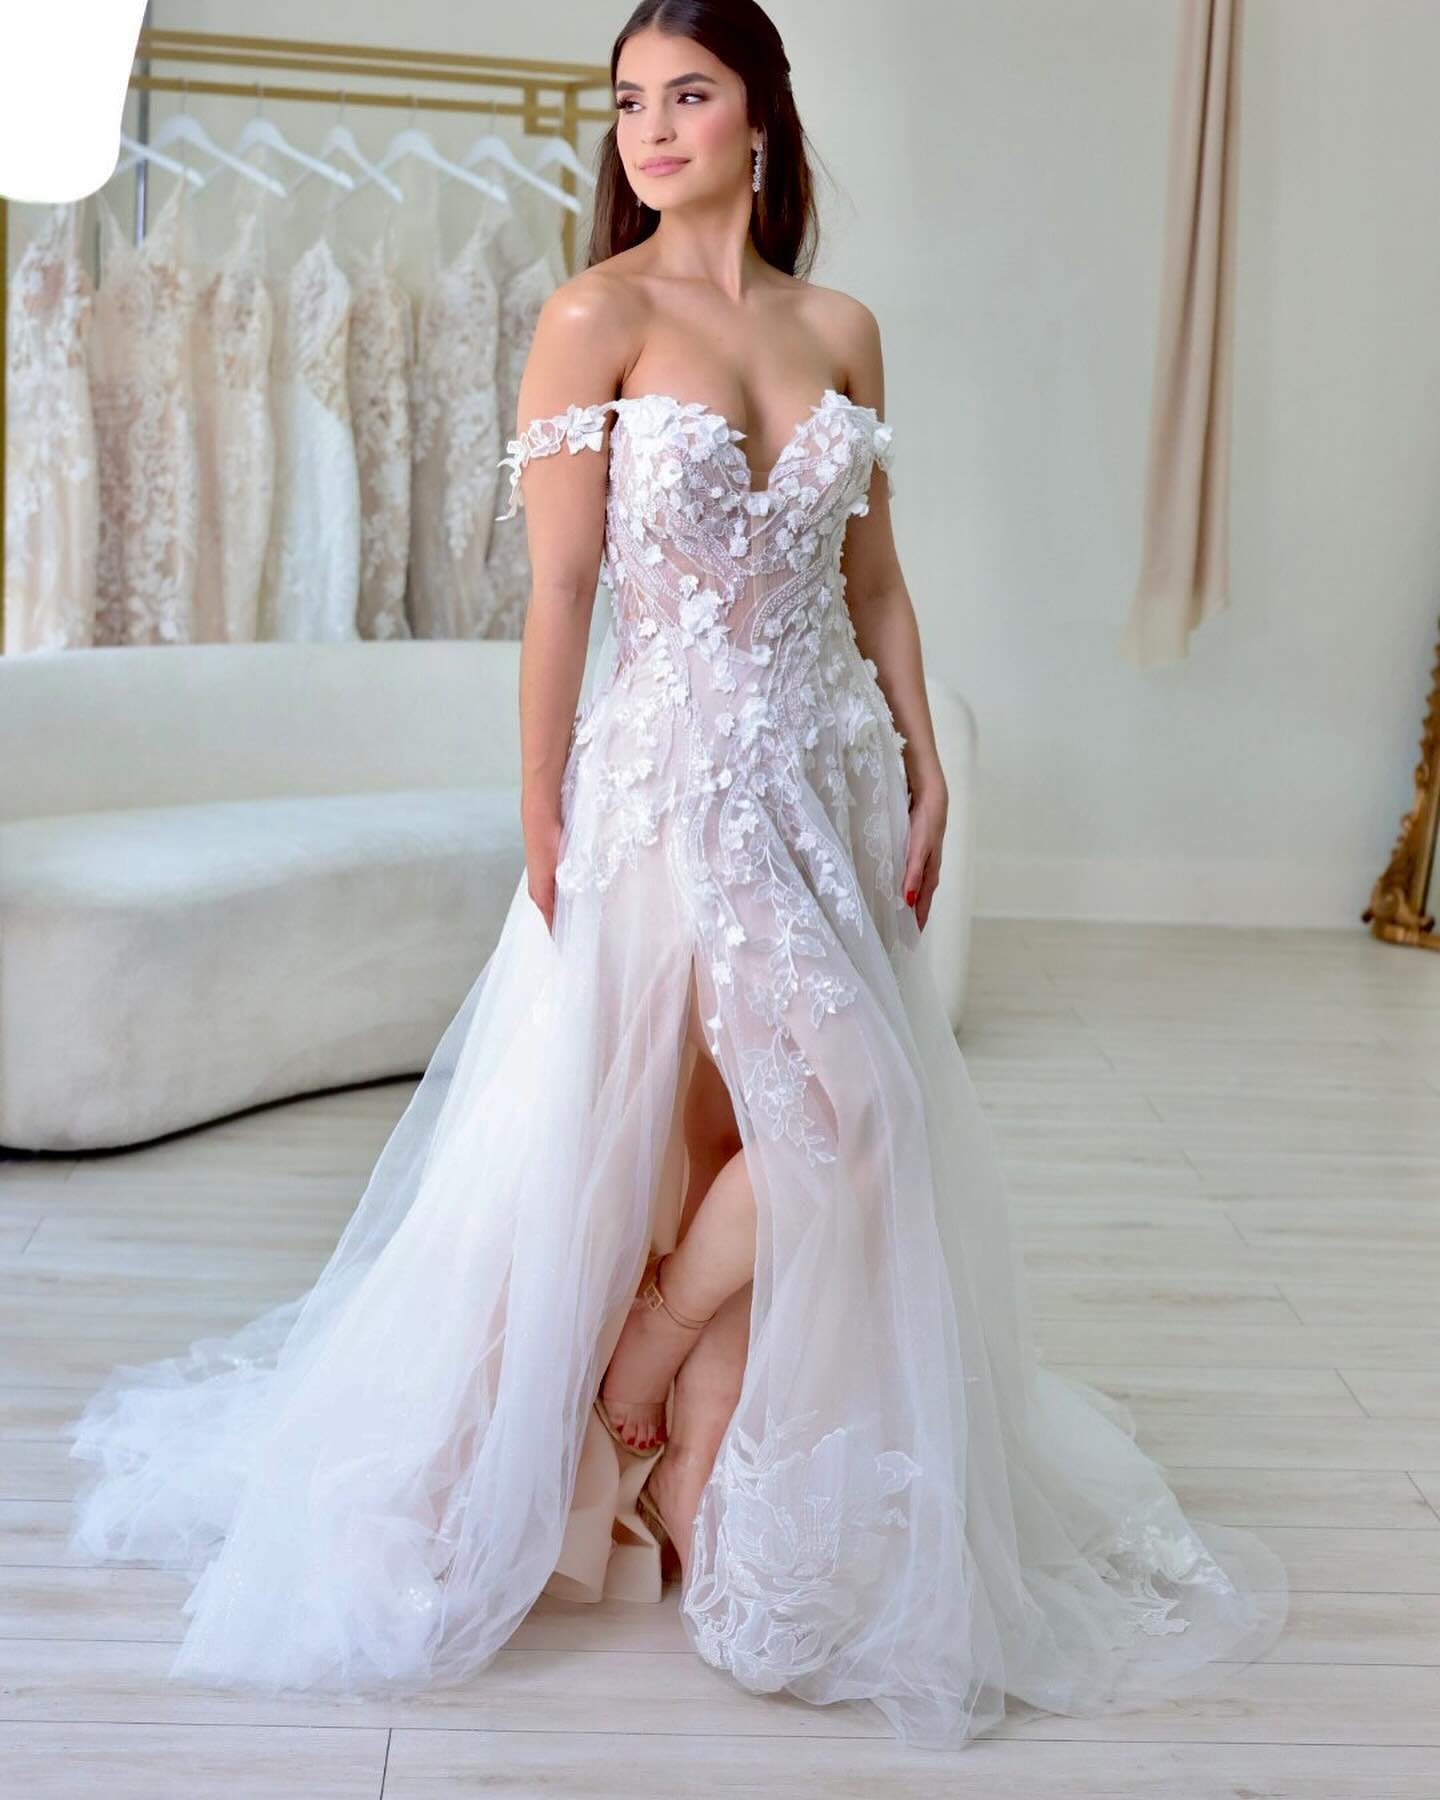 Its giving Fairy Bride 🧚swipe left to see her in different bodies 👀😍❤️ #miamibride #weddingdress #sayyestothedress